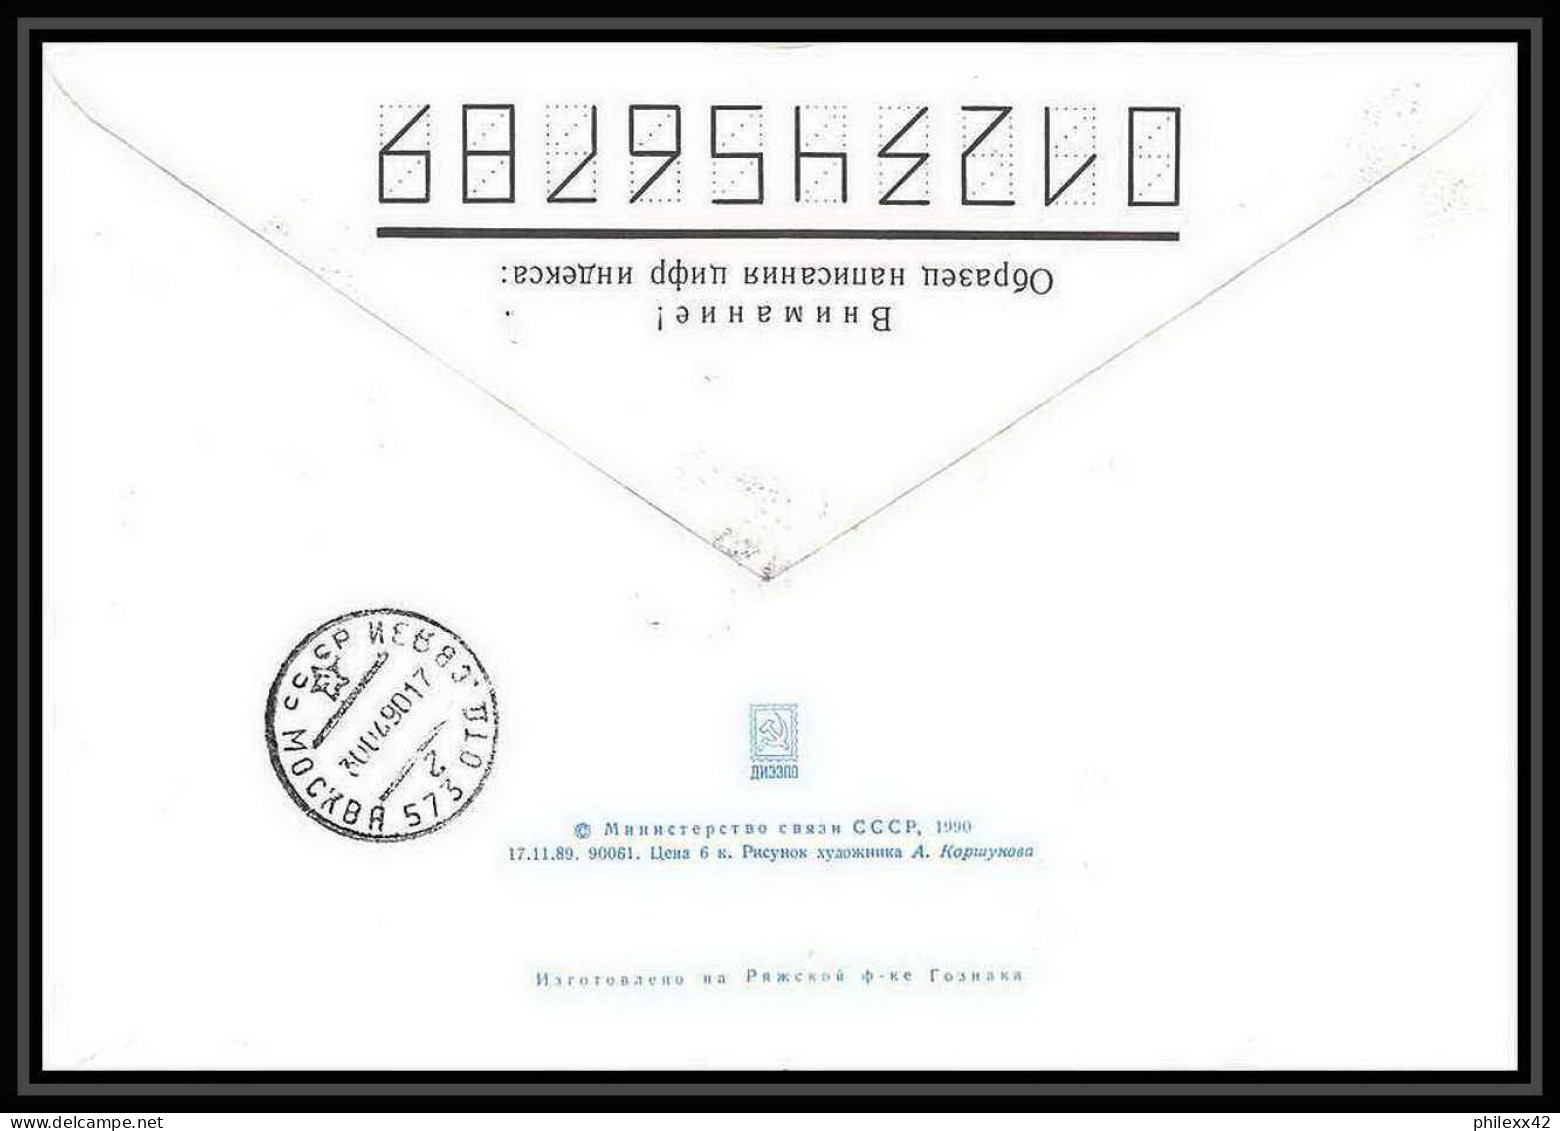 10062/ Espace (space) Entier Postal (Stamped Stationery) 12/4/1990 DAY OF COSMONAUTIC (urss USSR) - Russie & URSS